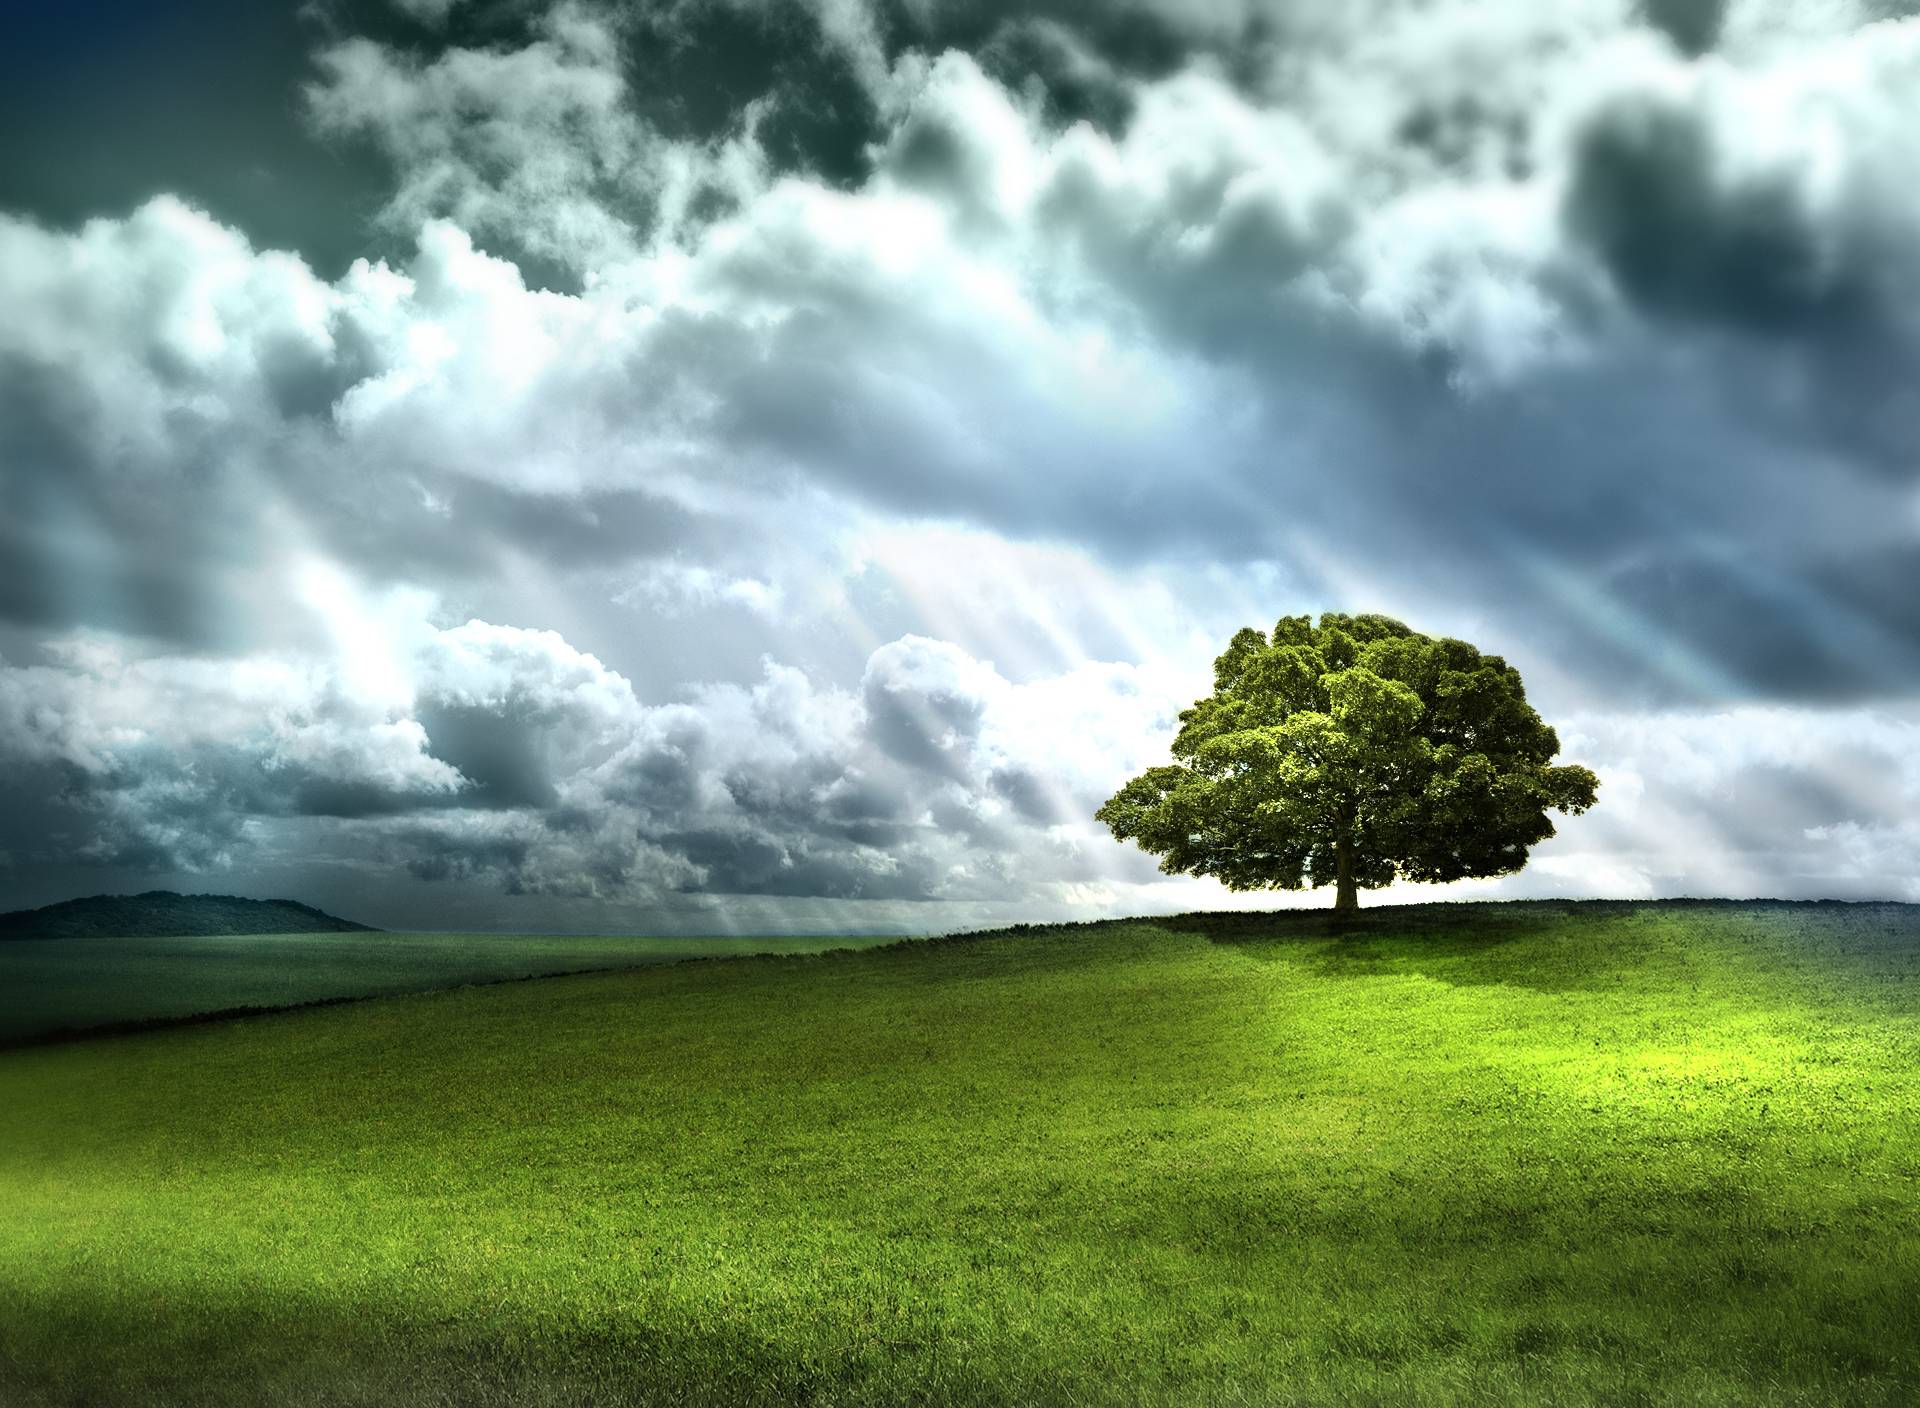 Wallpaper Green Tree on Green Grass Field Under White Clouds and Blue Sky During Daytime, Background Free Image